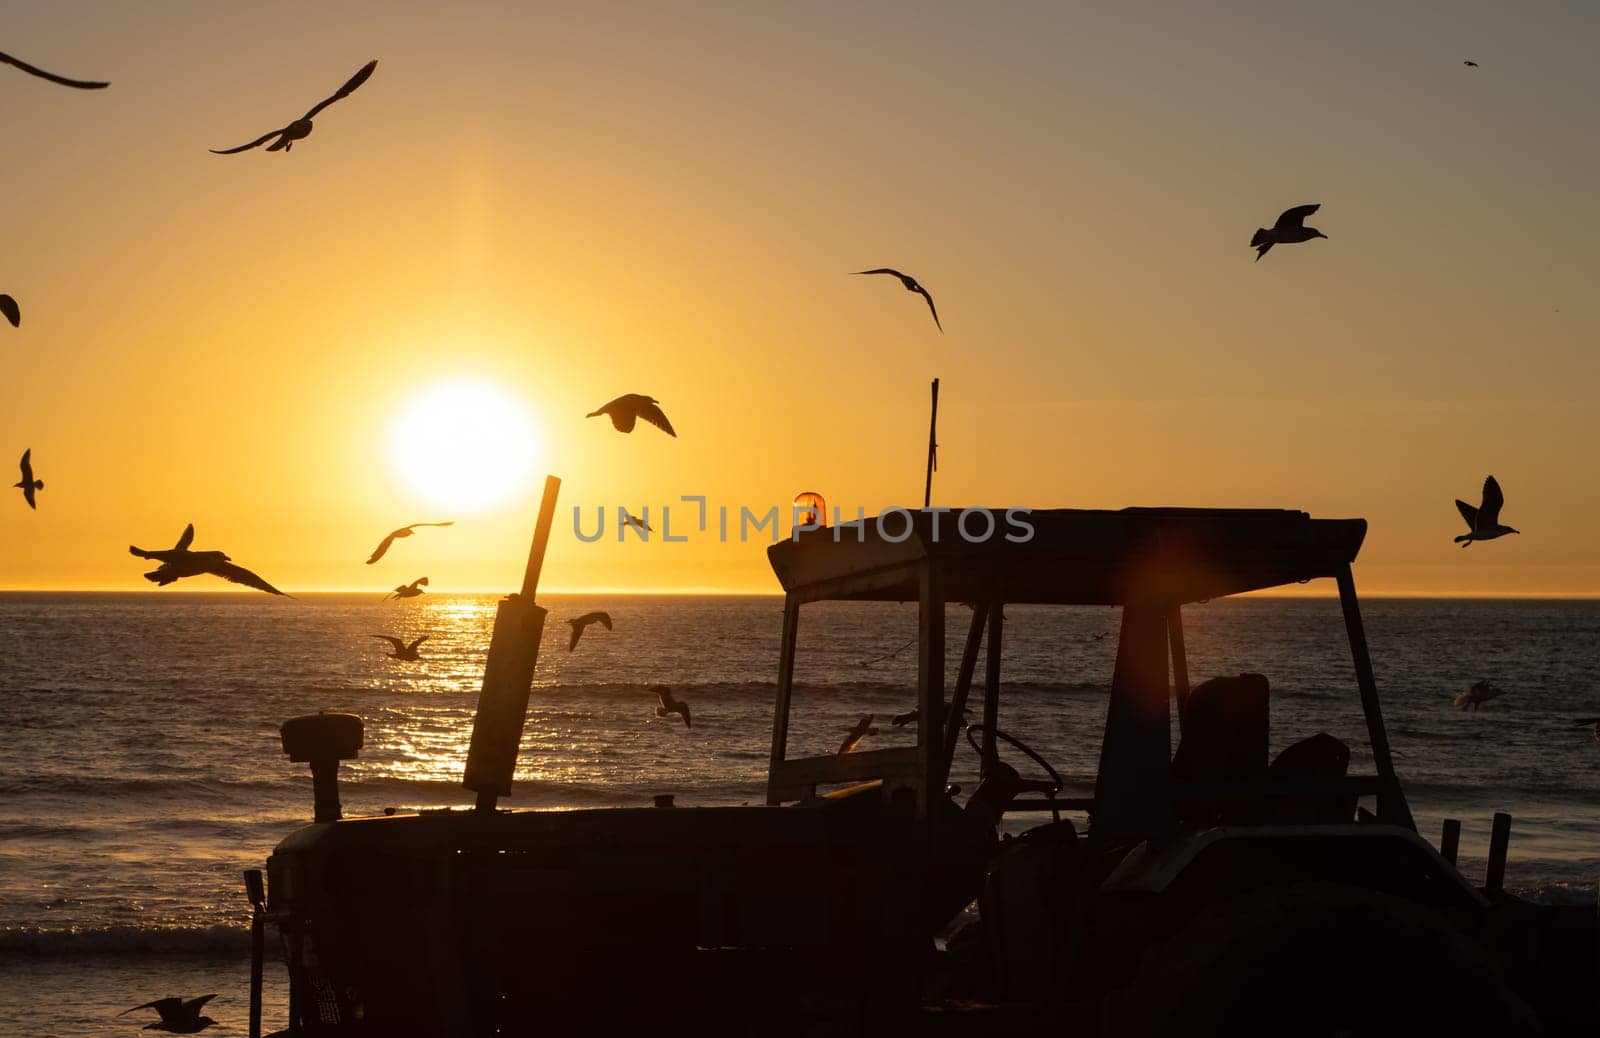 Seagulls fly over the sea at sunset - a tractor that helps in fishing stands on the shore. Mid shot